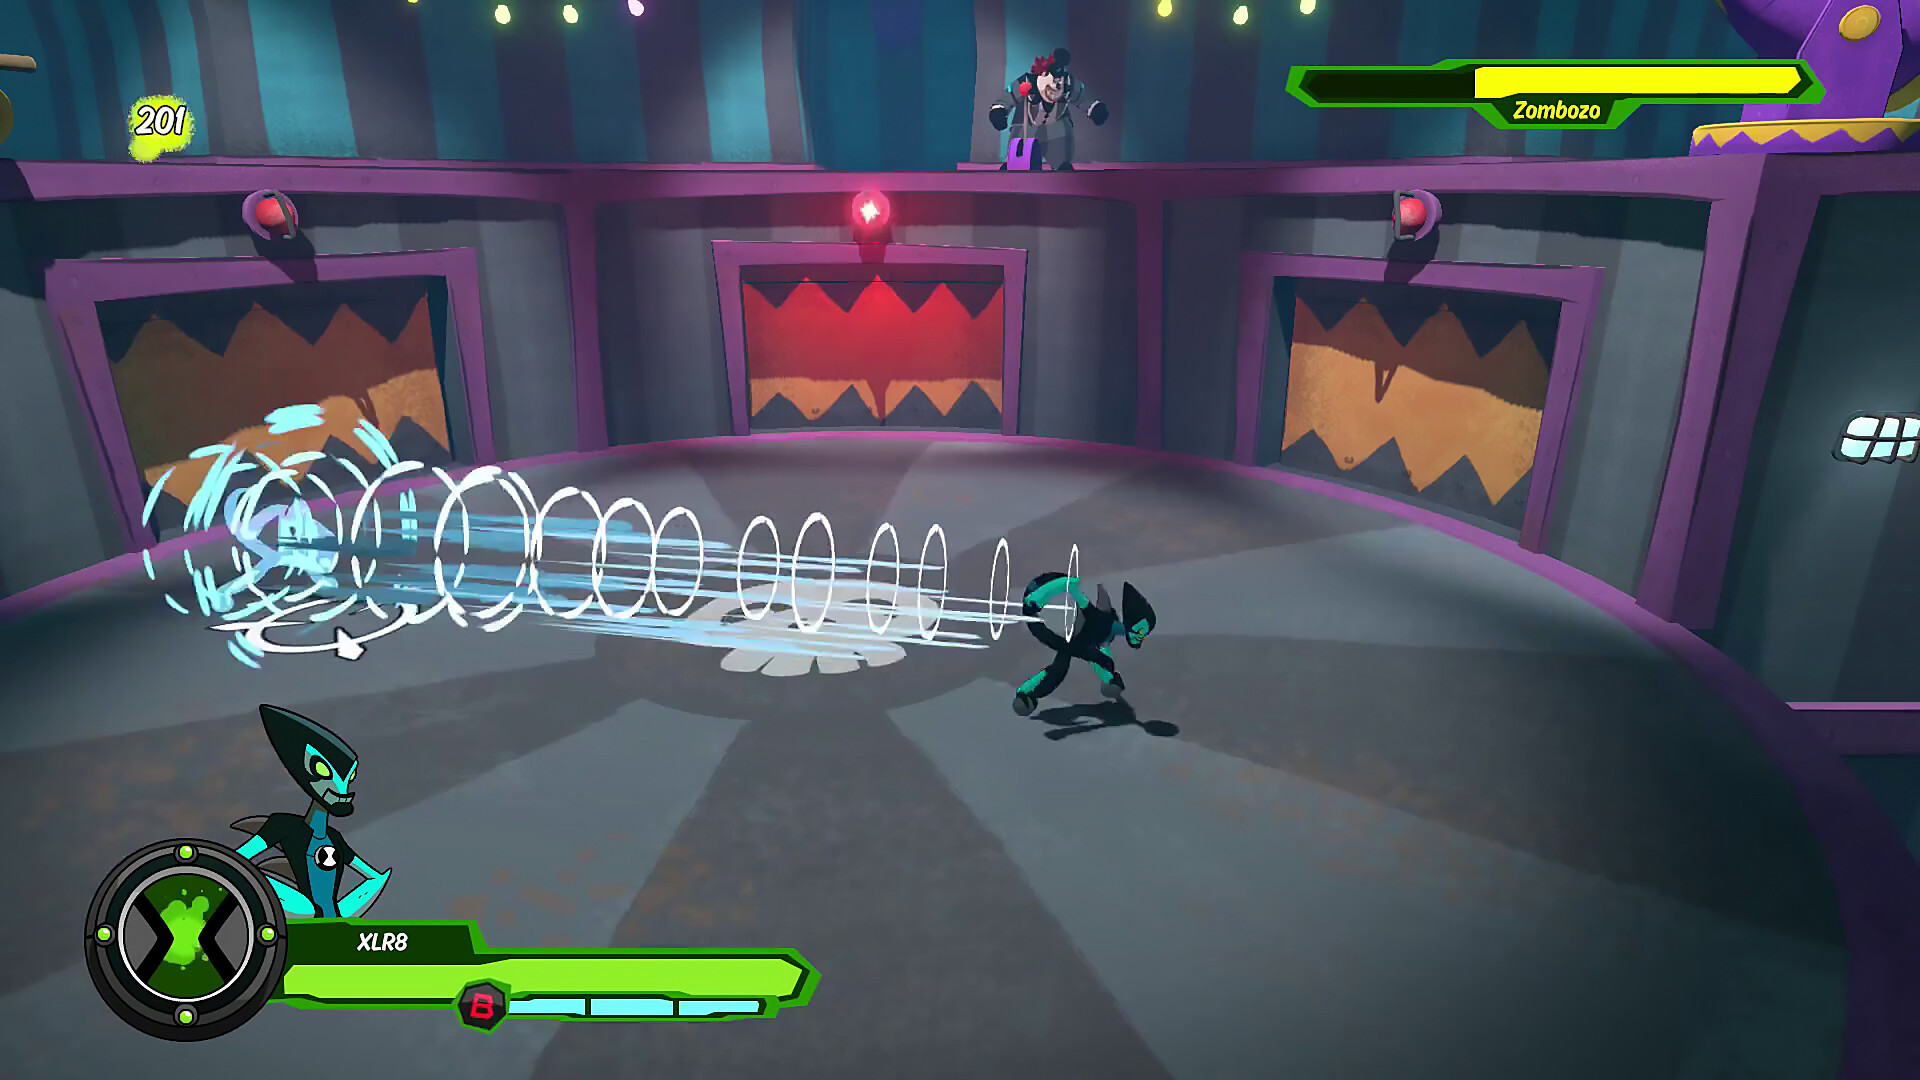 Ben 10, Free online games and video